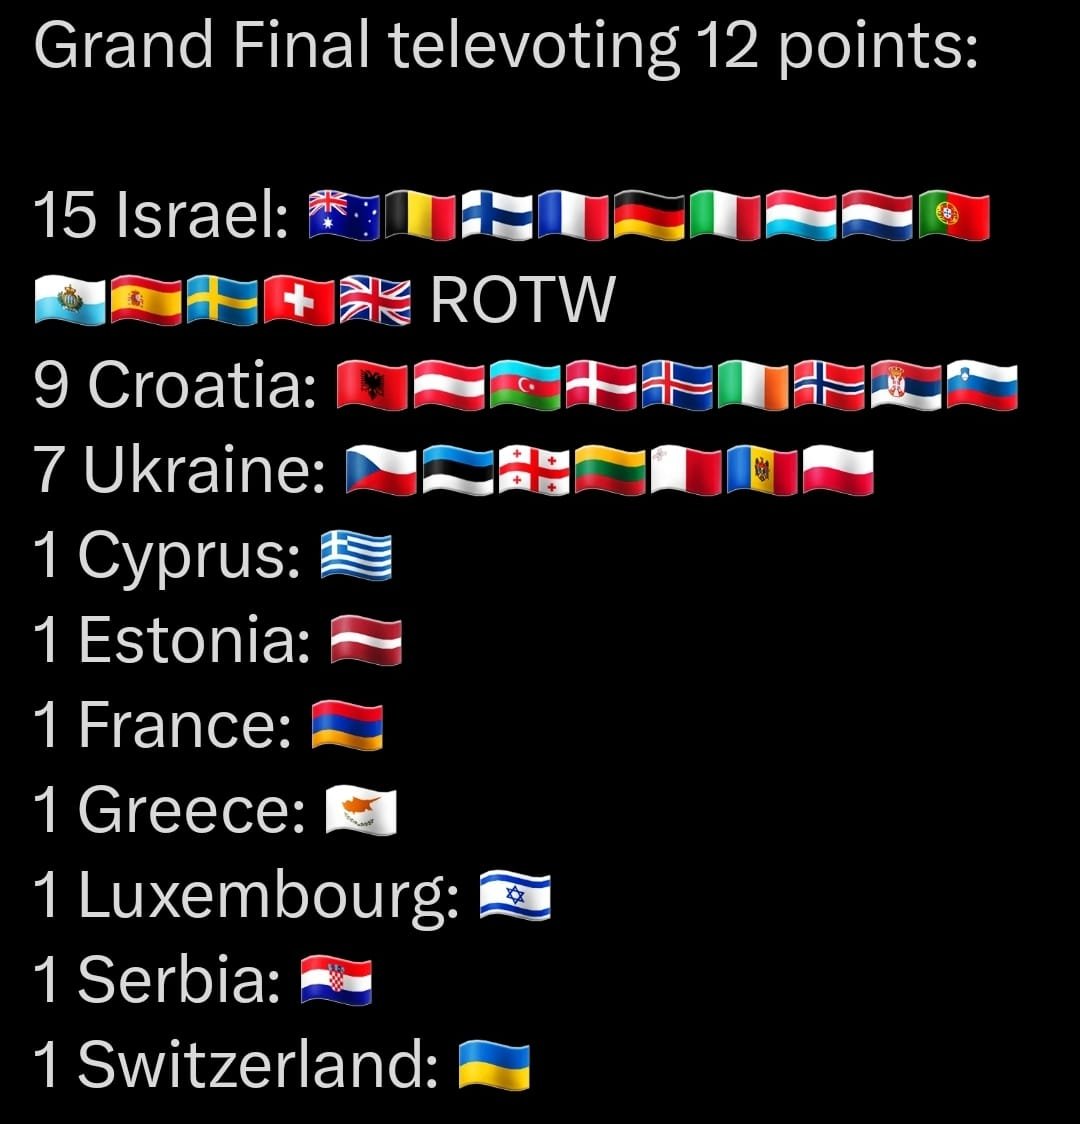 Because I have seen this nonsense a few times, it's time for a #factcheck from someone who has years of experience in data analysis and is a self-confessed #eurovision nerd. If Israel wanted to manipulate the the televote they would have done what others tried in the past and